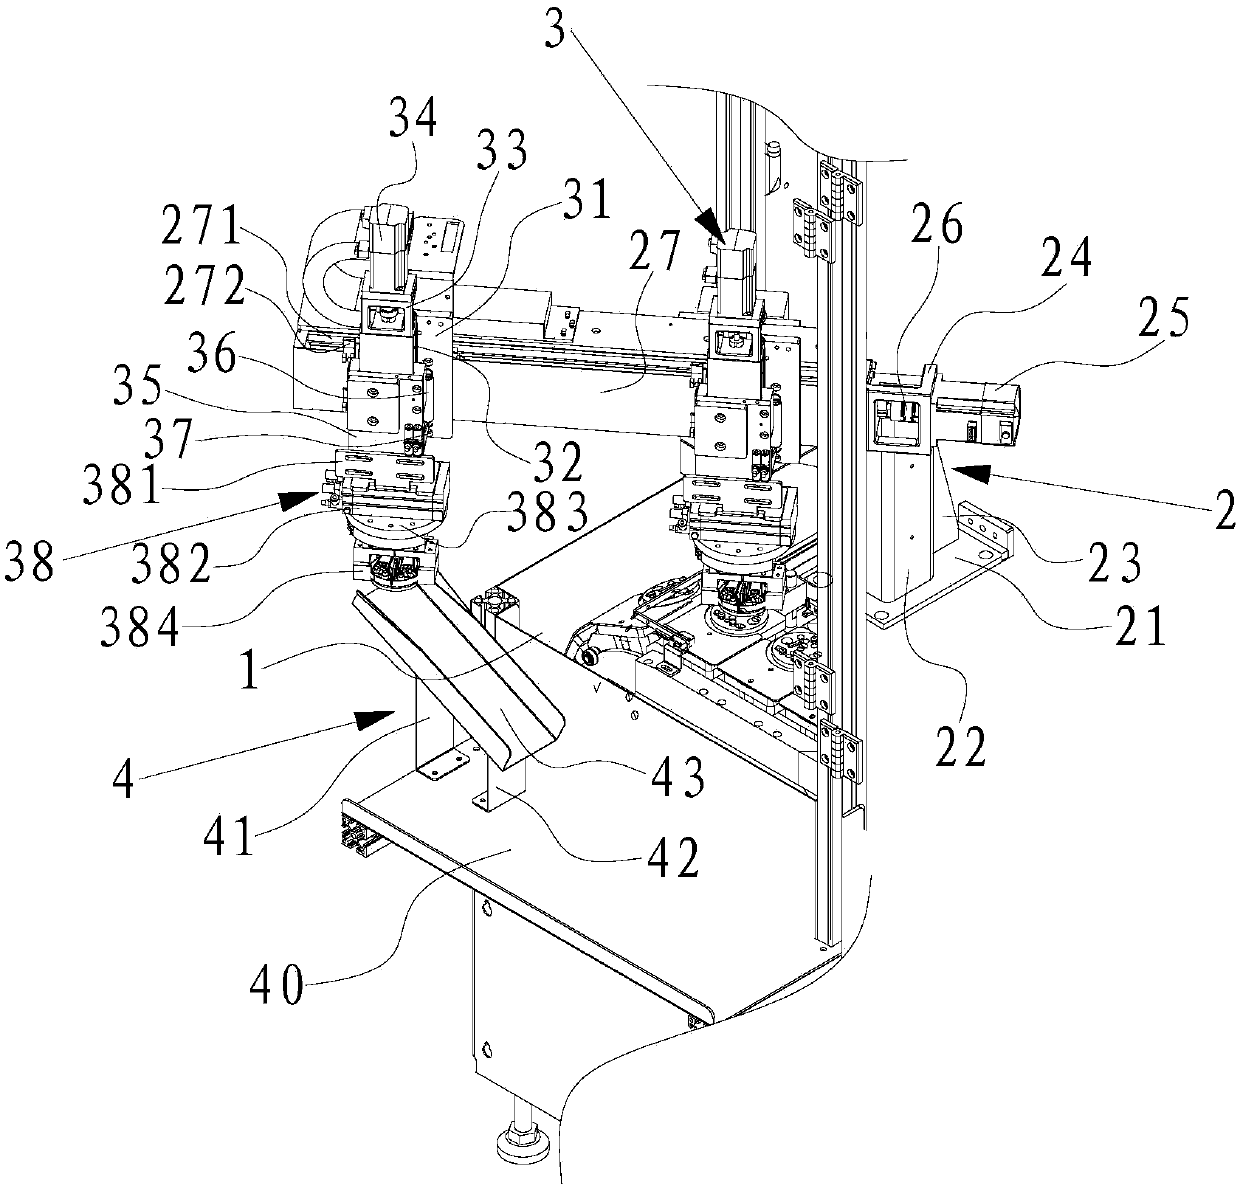 Blanking assembly of rack assembling control system